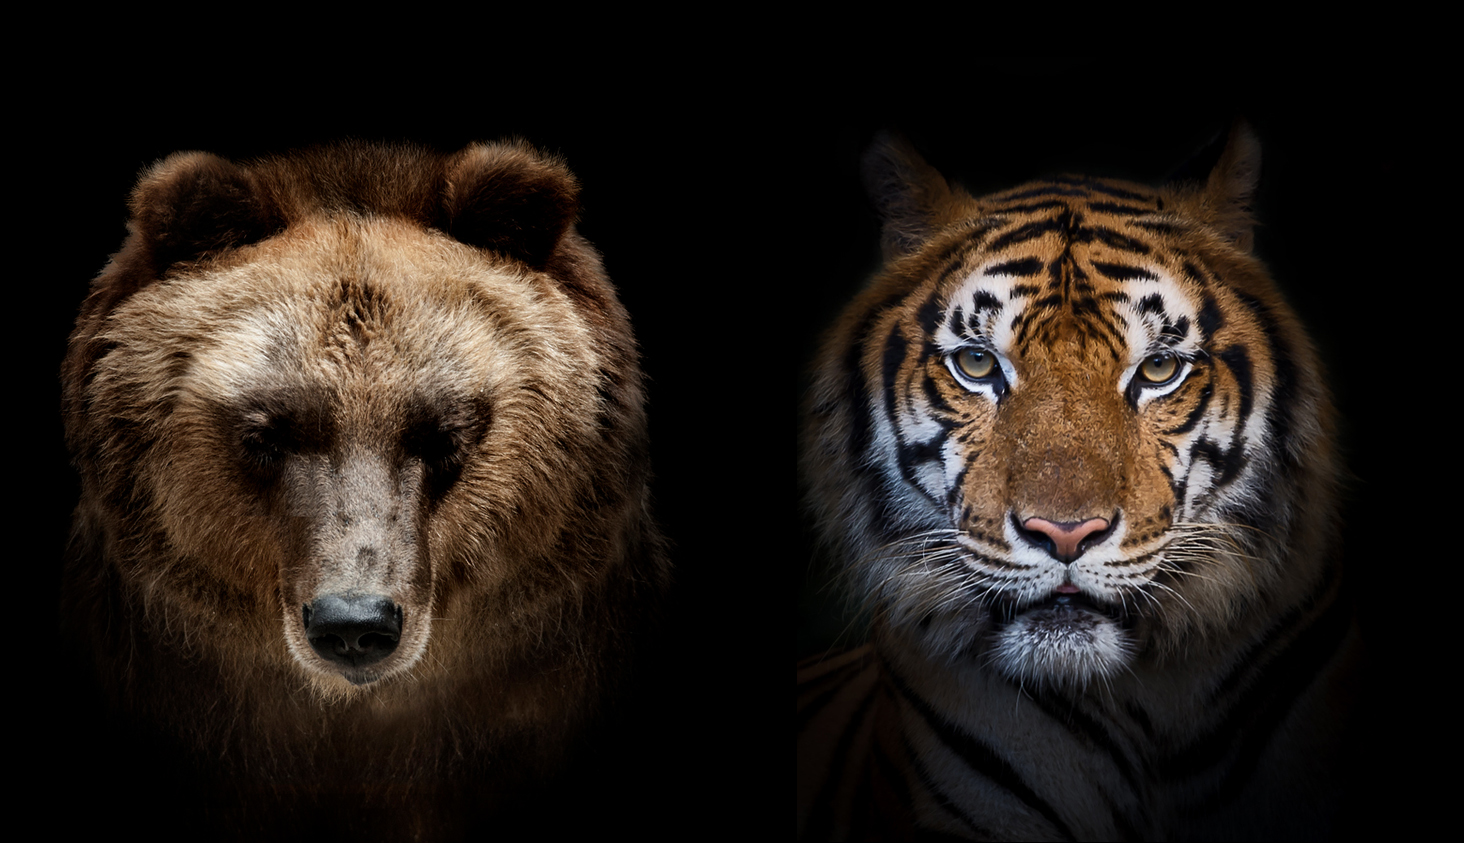 A photograph of a bear and tiger looking ahead, side by side in front of a black background. The lighting is dramatic.